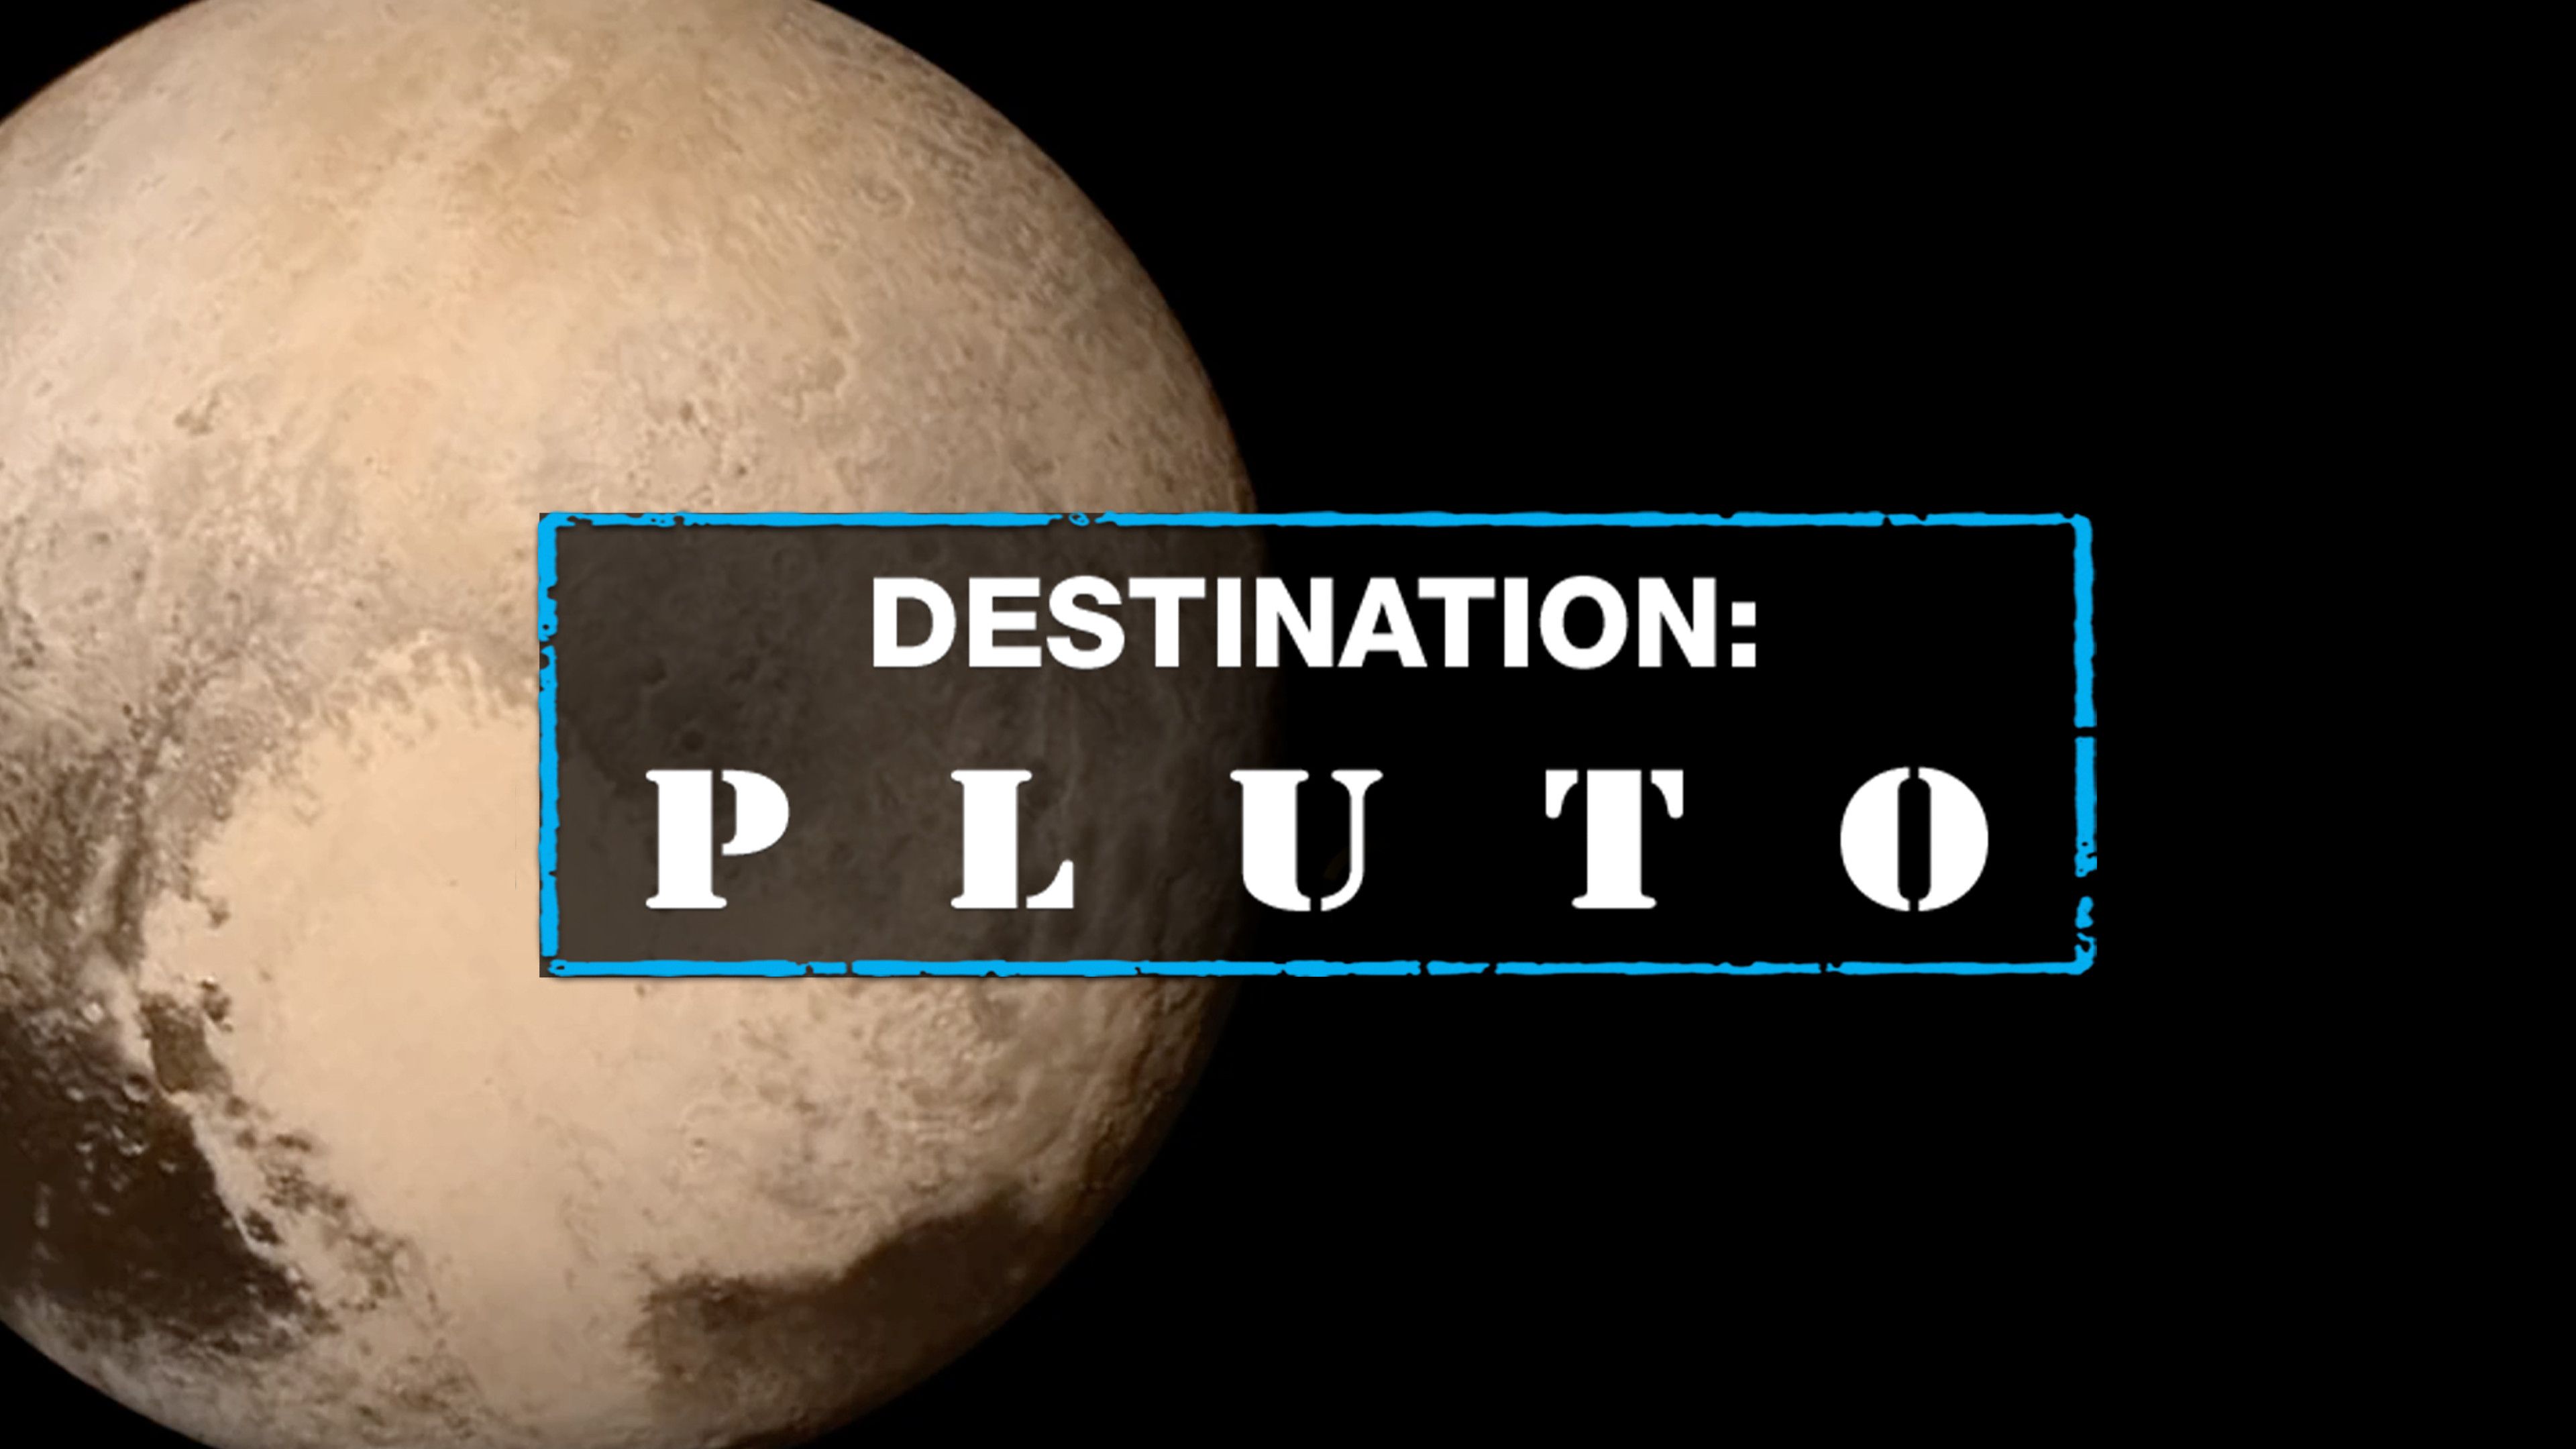 Part 8: The "Giant Heart" On Pluto